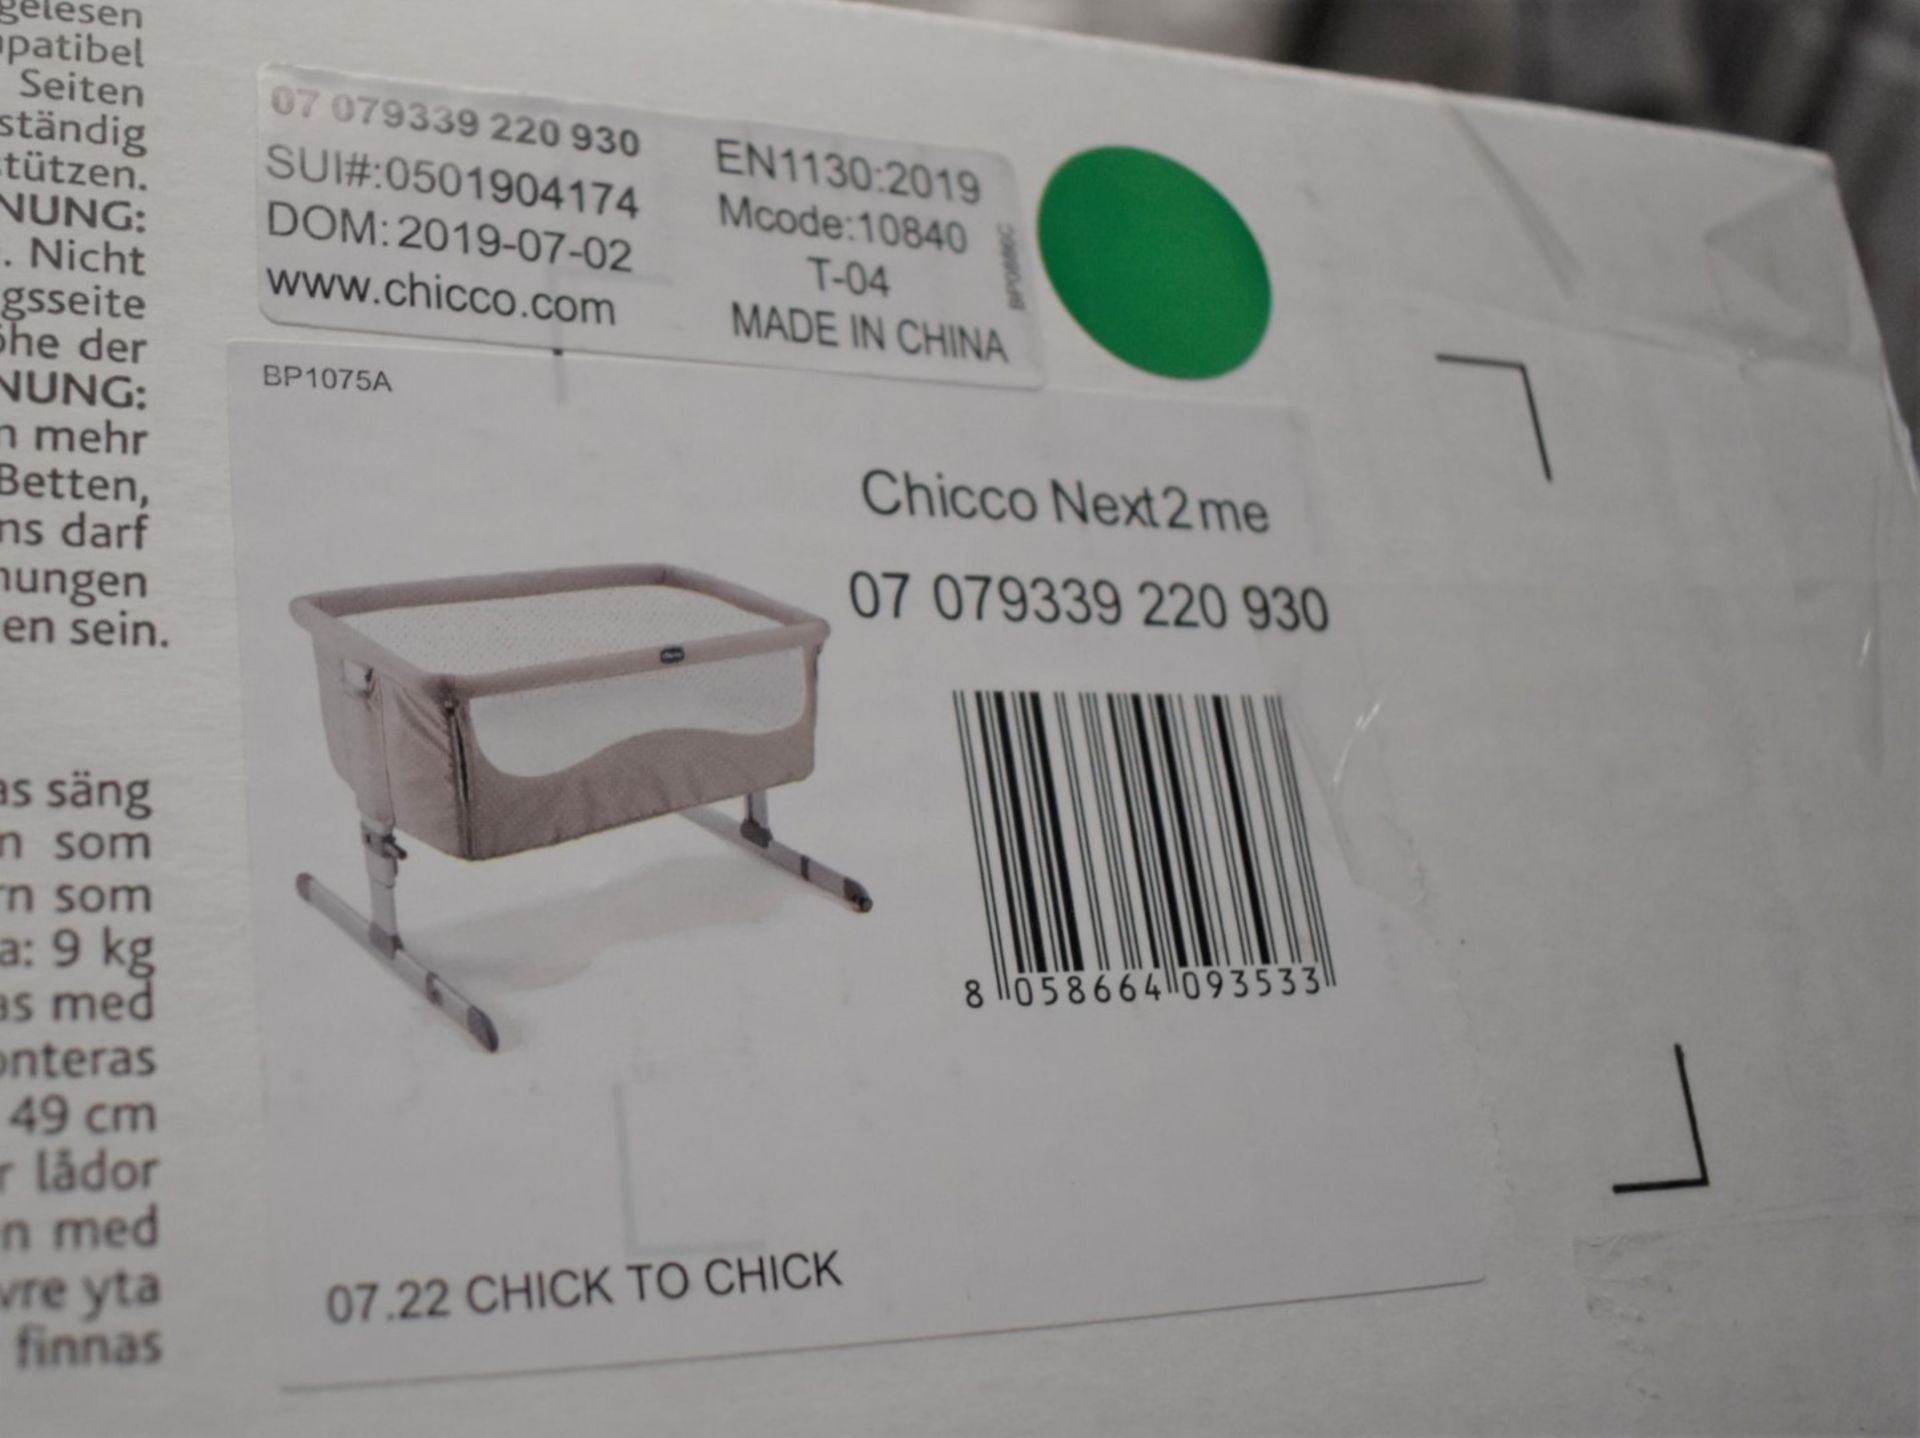 1 x Chicco Next2me Chick to Chick Bedside Baby Crib - Brand New 2019 Sealed Stock - Includes - Image 2 of 5